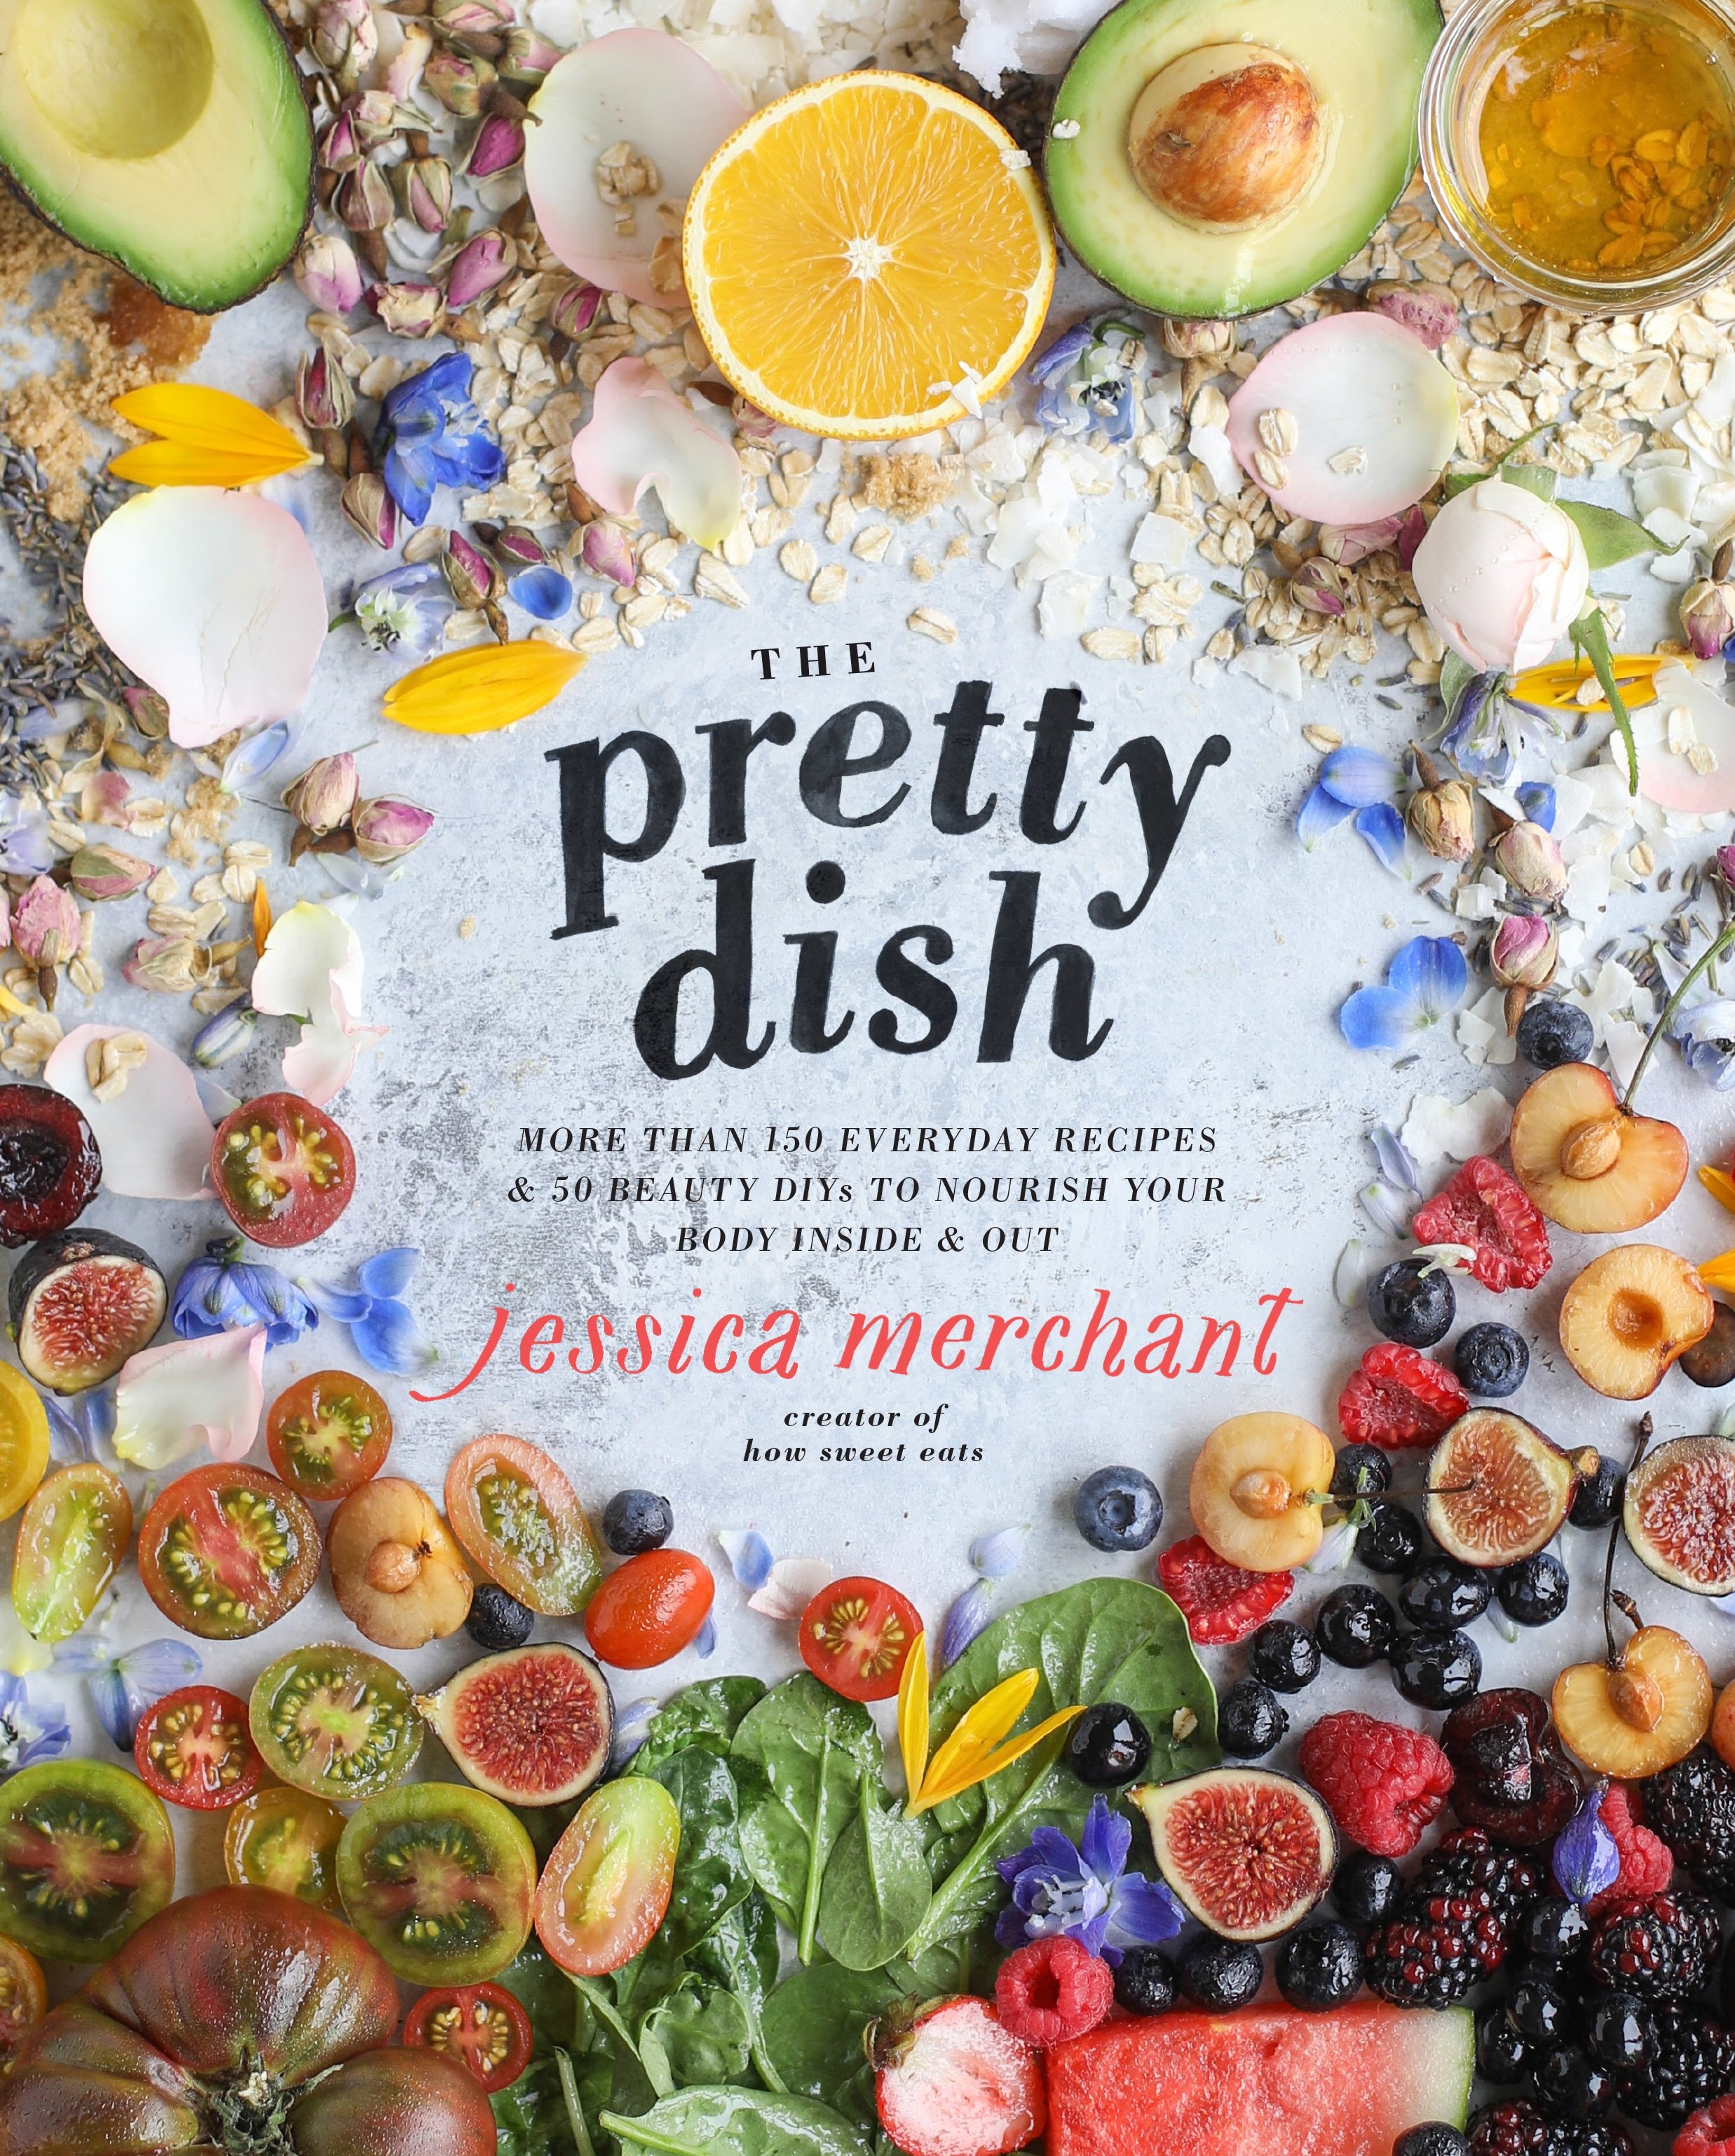 Come to us for the beautiful Dish Book Club in November. I howsweeteats.com #theprettydish #bookclub